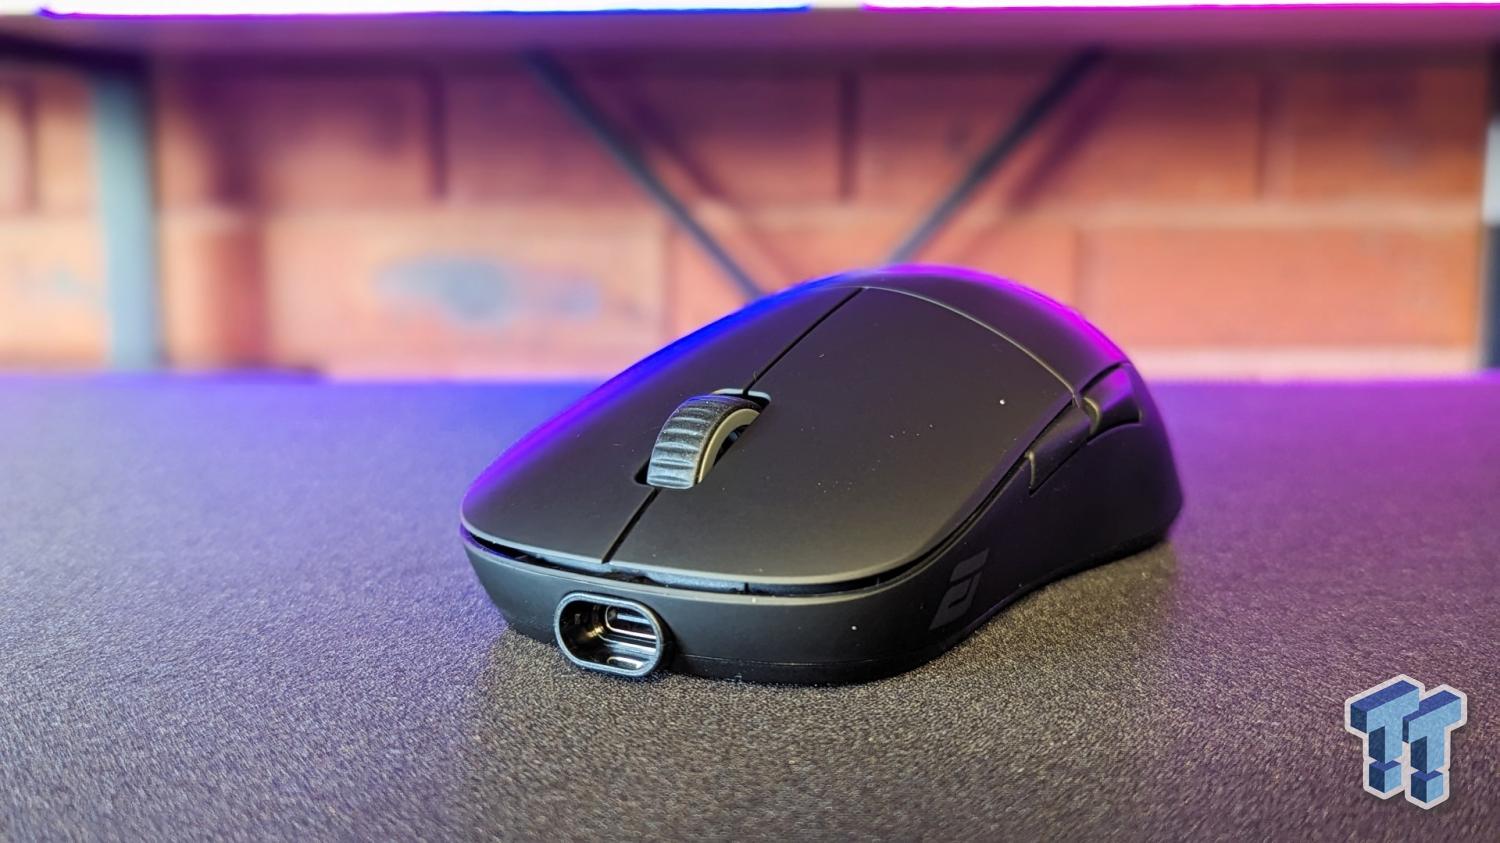 Endgame Gear XM2we review: The ultimate claw grip mouse - Dexerto